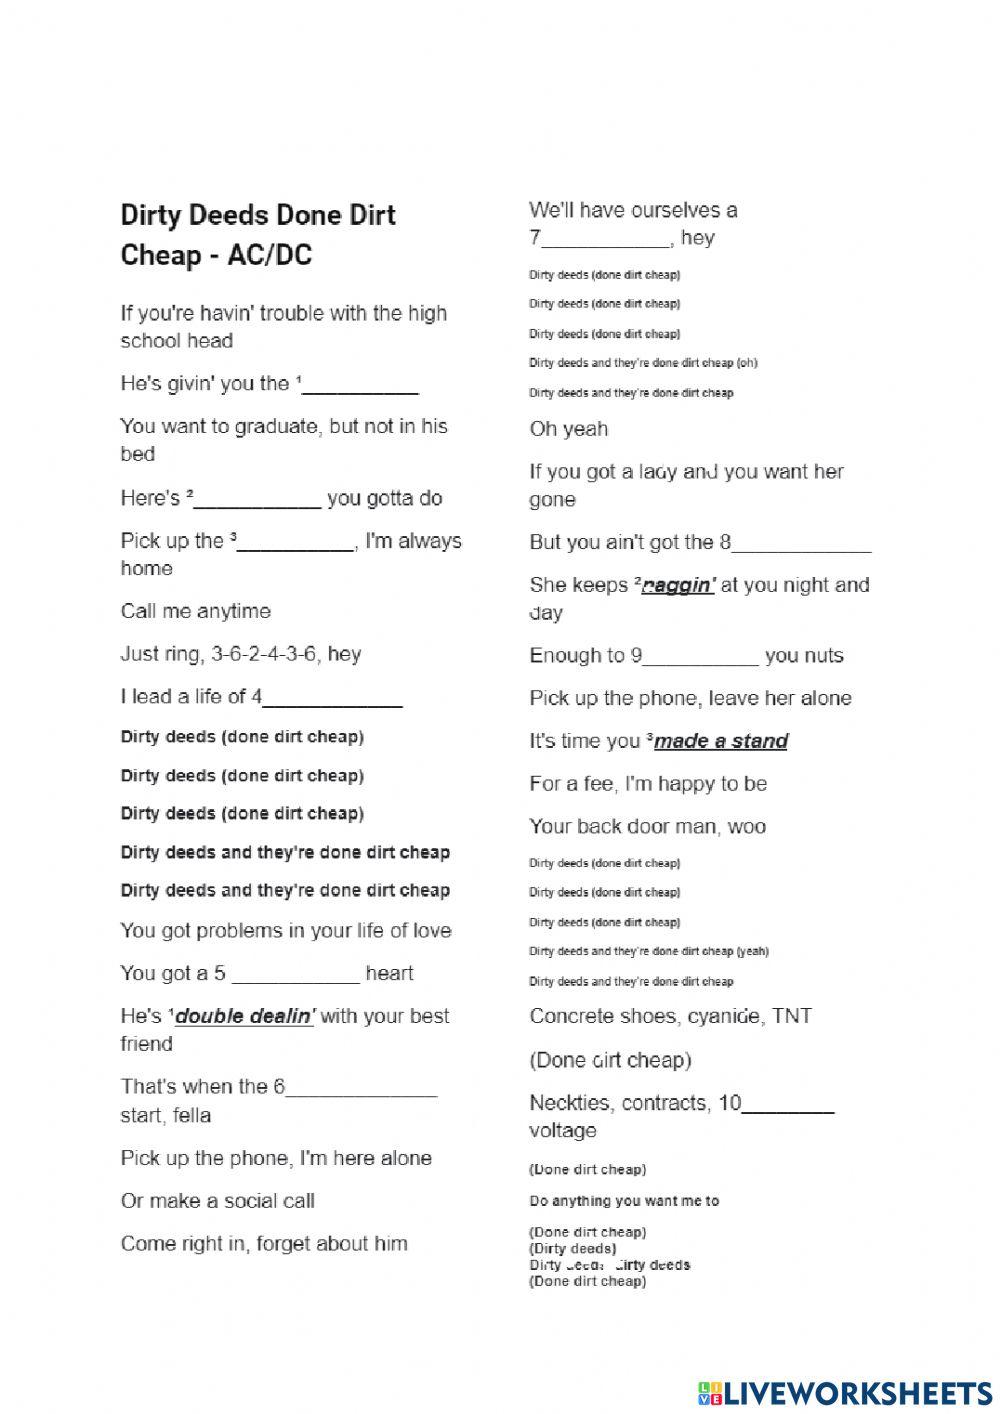 Ac-dc dirty deeds done dirt cheap worksheet | Live Worksheets